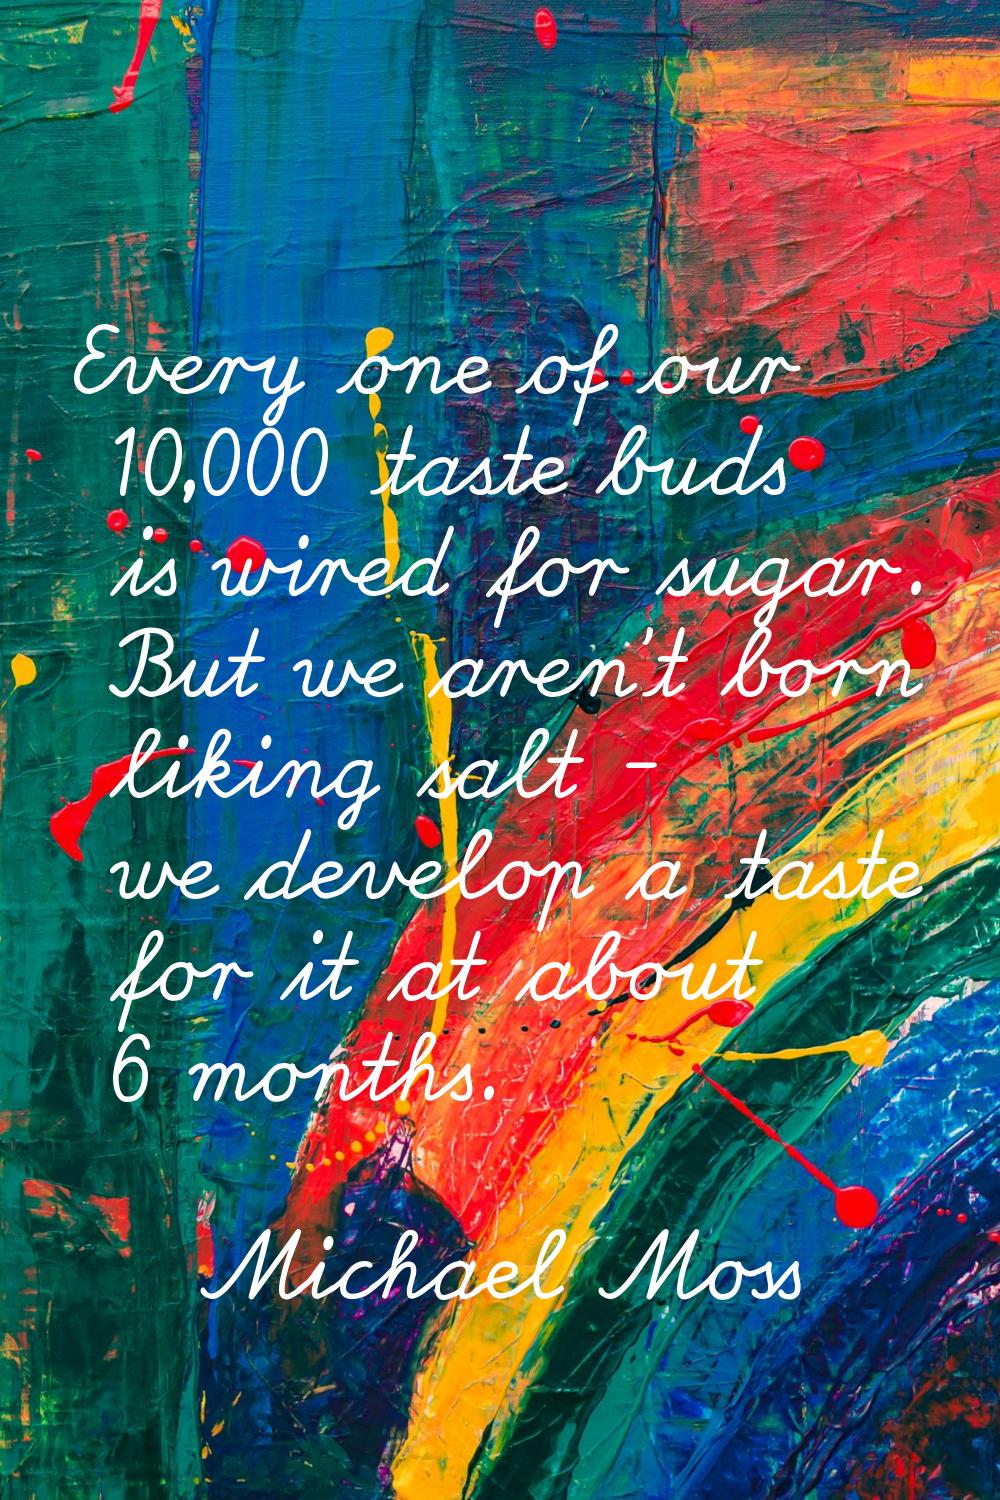 Every one of our 10,000 taste buds is wired for sugar. But we aren't born liking salt - we develop 